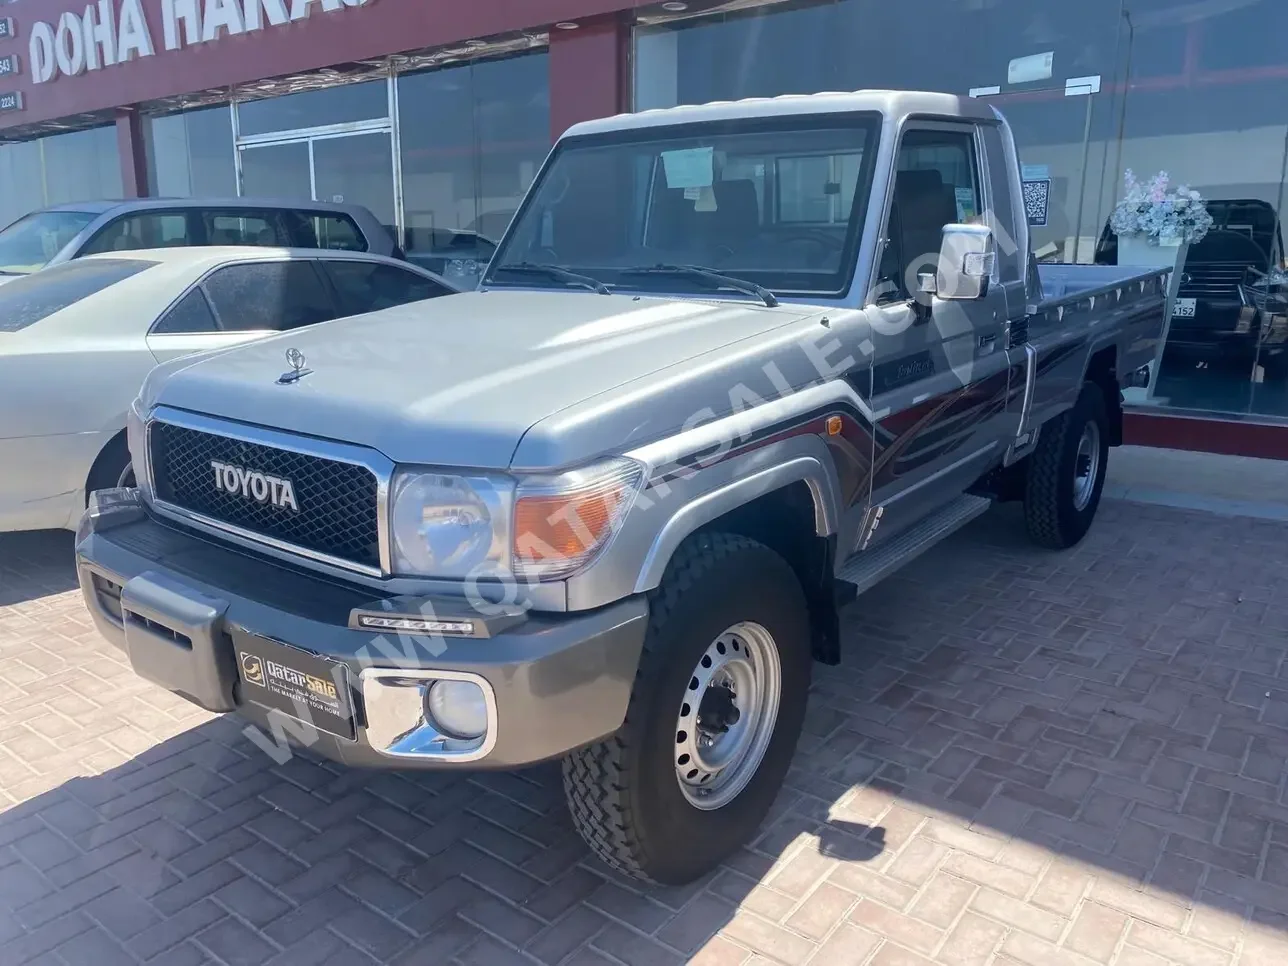 Toyota  Land Cruiser  LX  2021  Manual  91,000 Km  6 Cylinder  Four Wheel Drive (4WD)  Pick Up  Silver